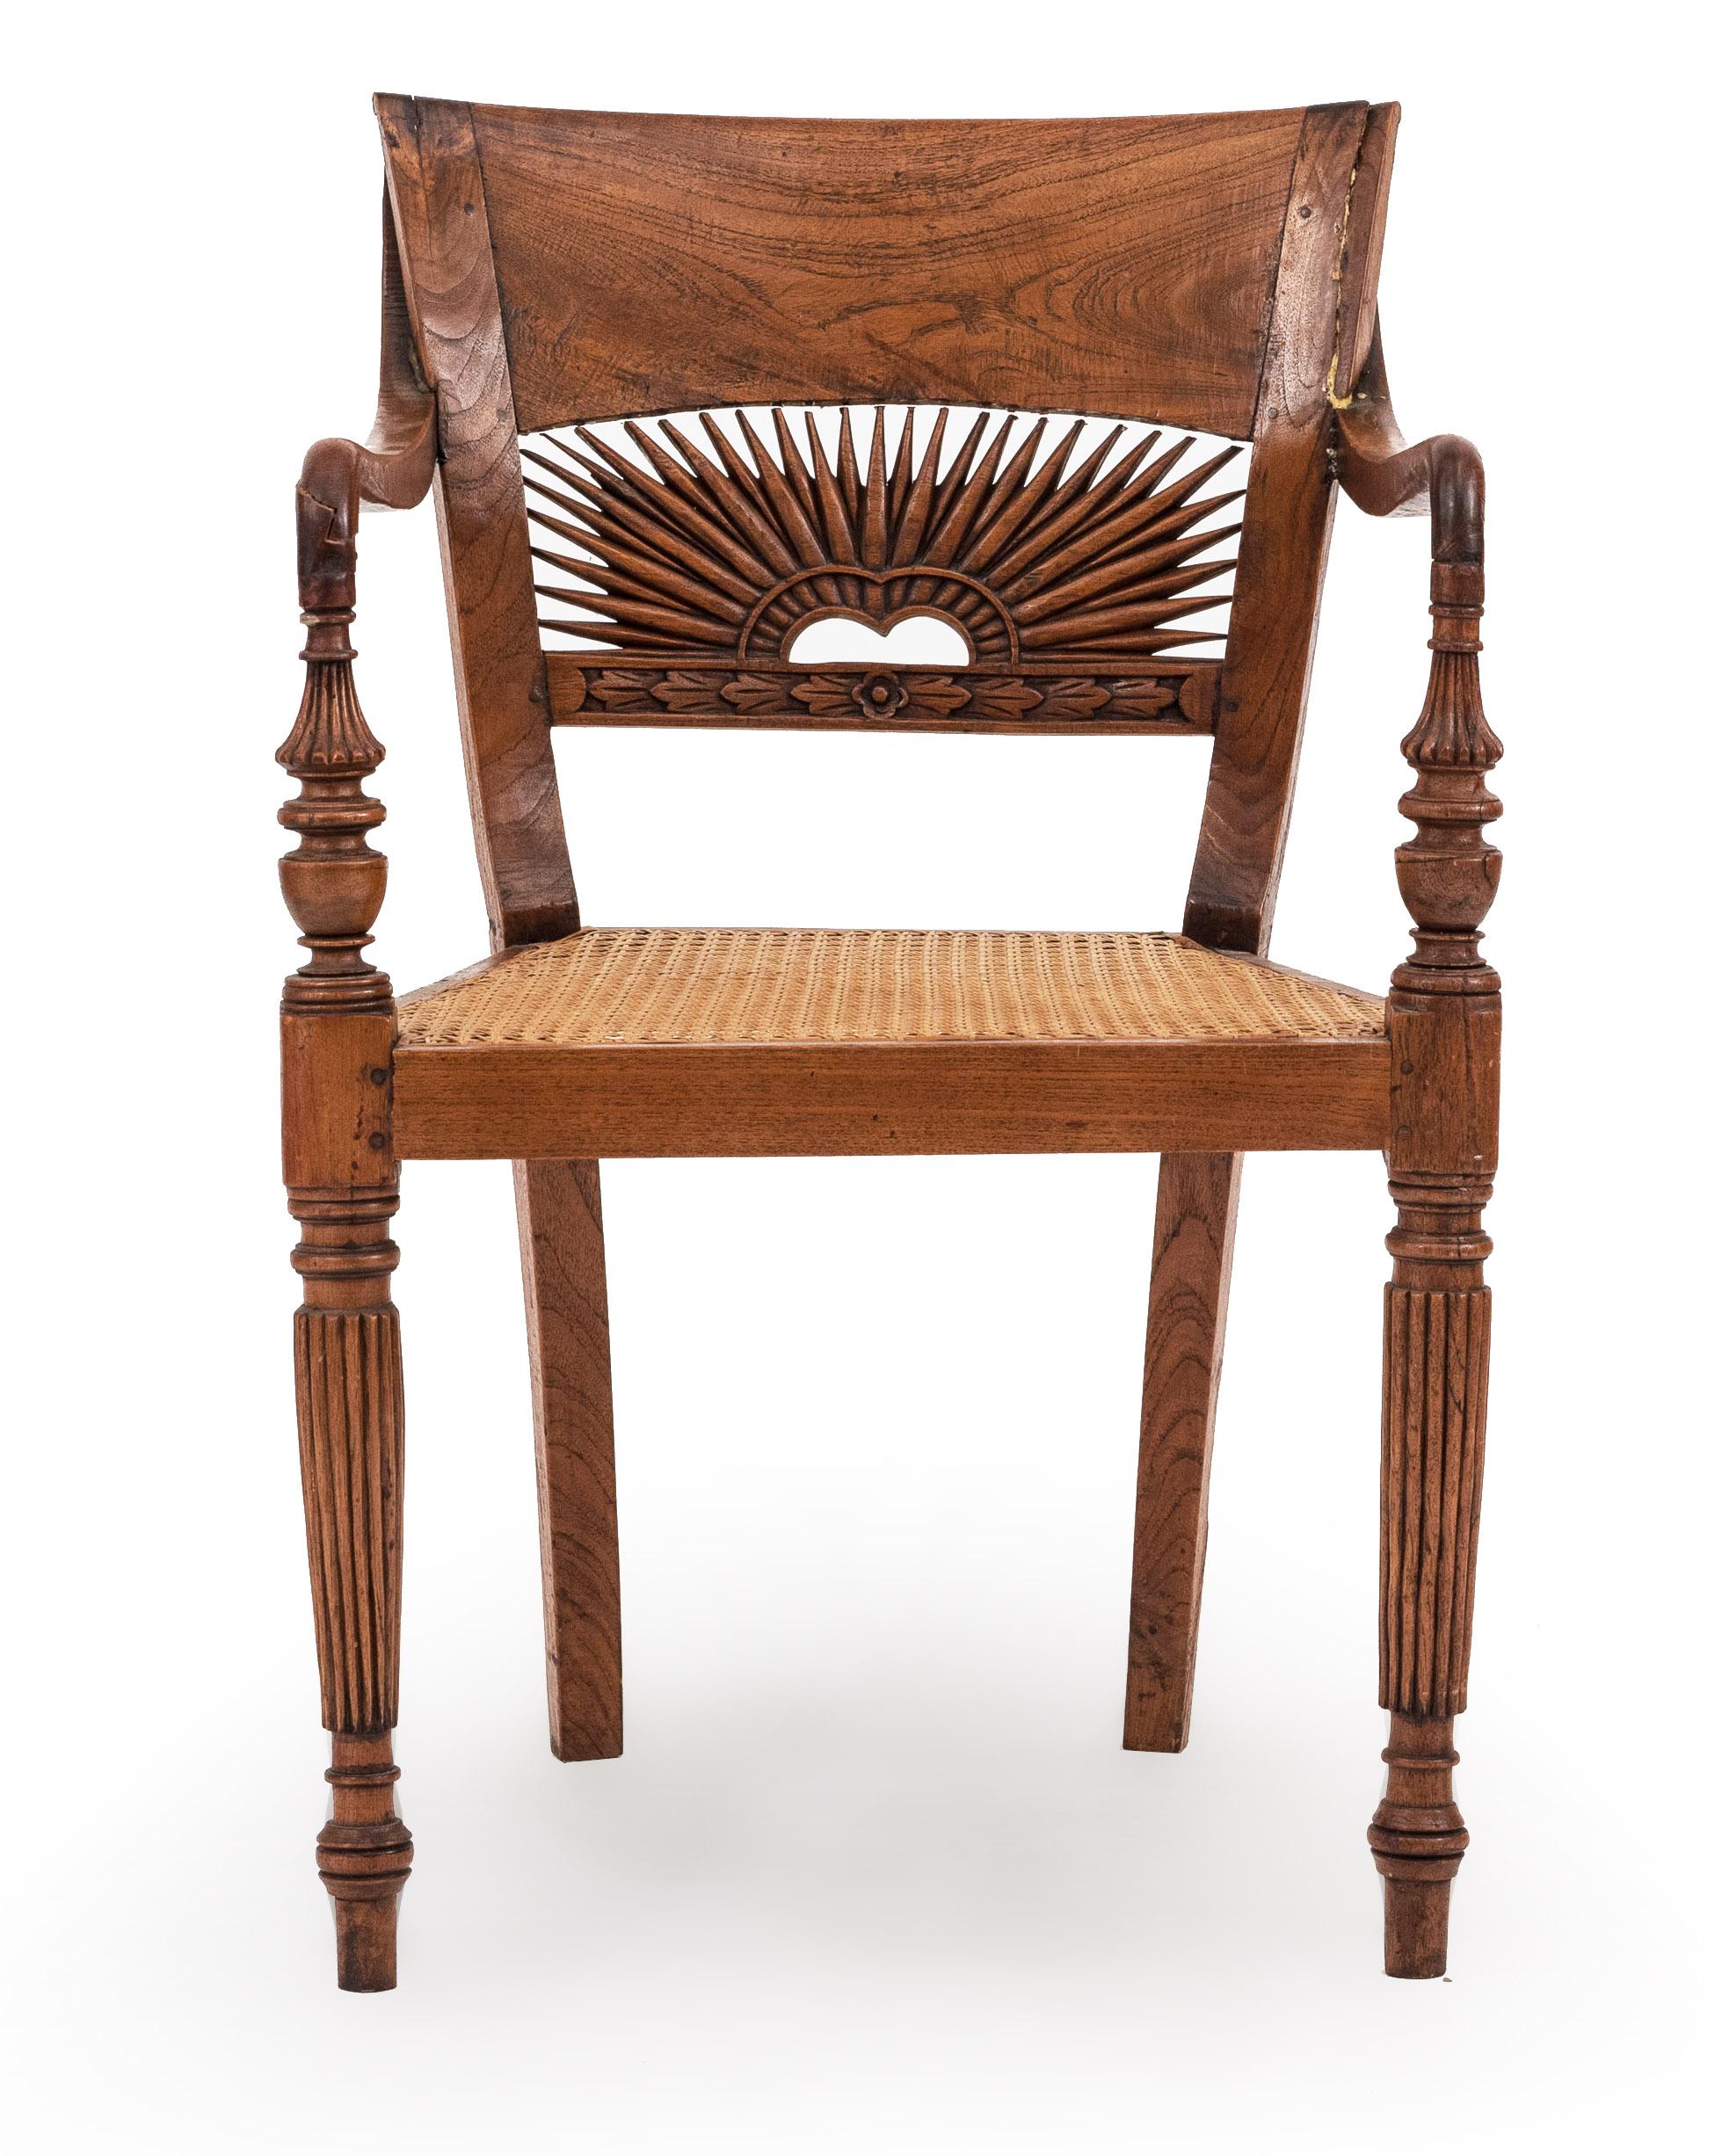 English Anglo-Indian teak arm chair with a cane seat and a slat sunburst carved back with fluted legs. (repair to back)